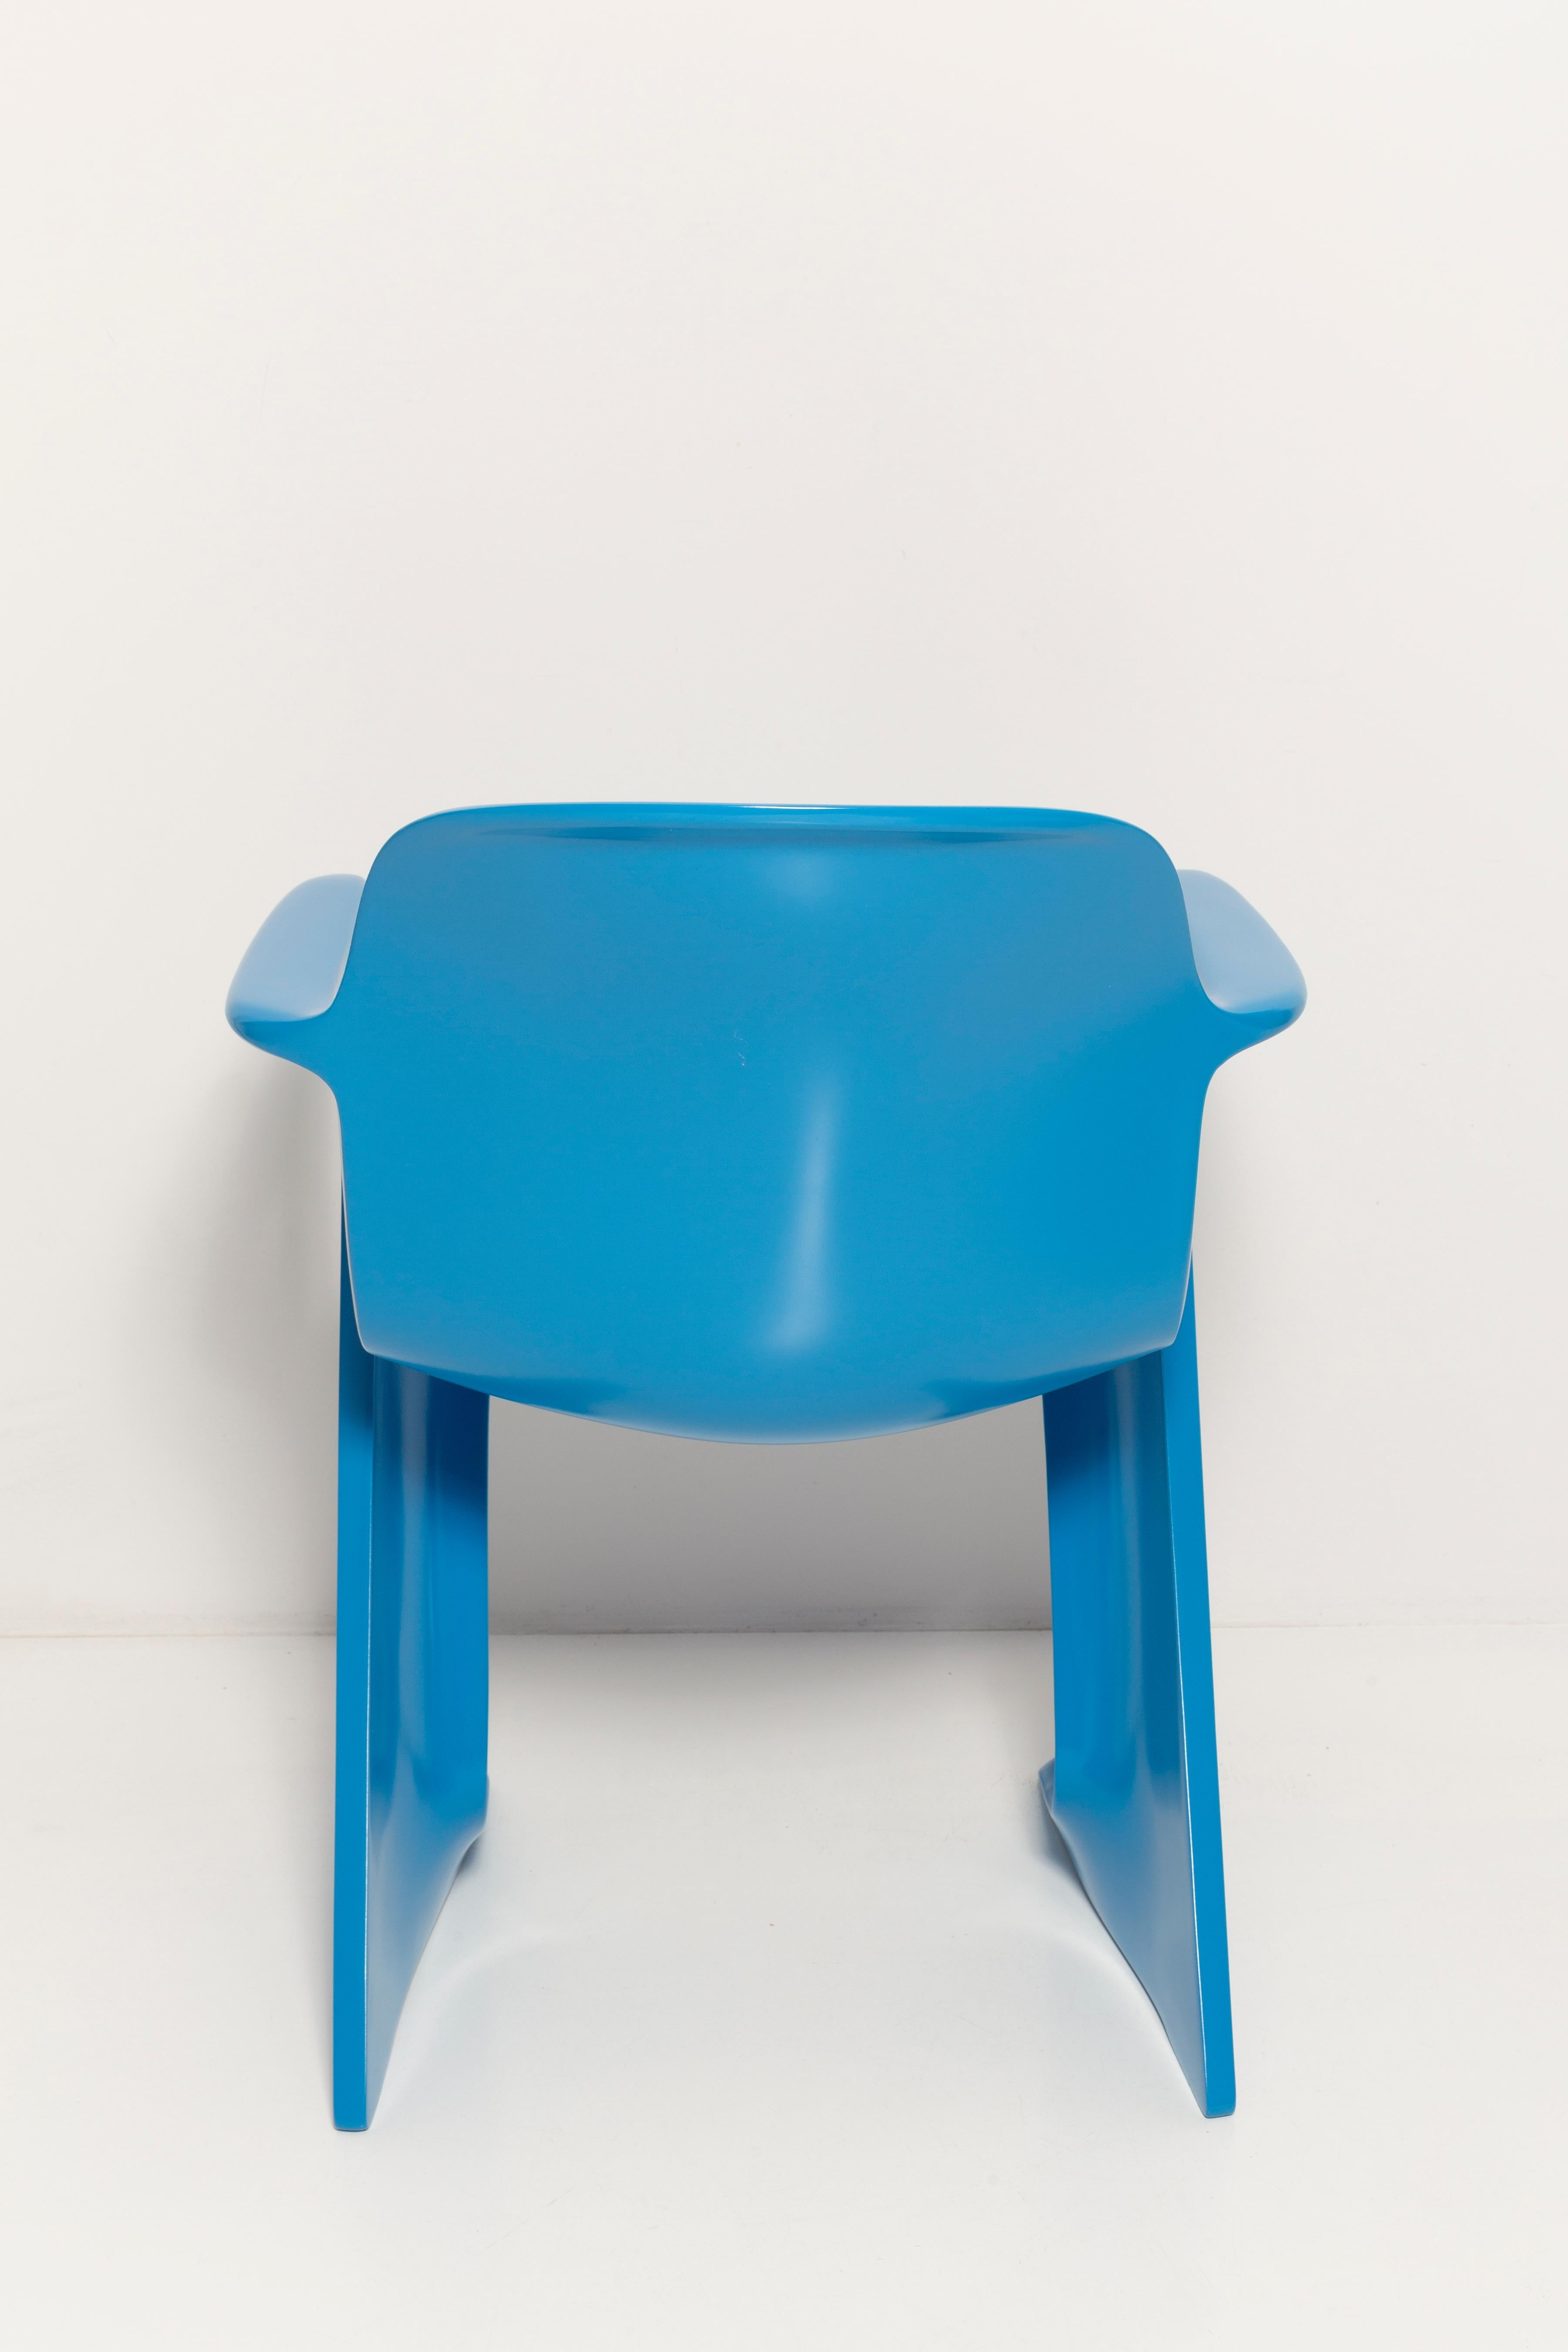 Set of Six Blue Kangaroo Chairs Designed by Ernst Moeckl, Germany, 1960s For Sale 4